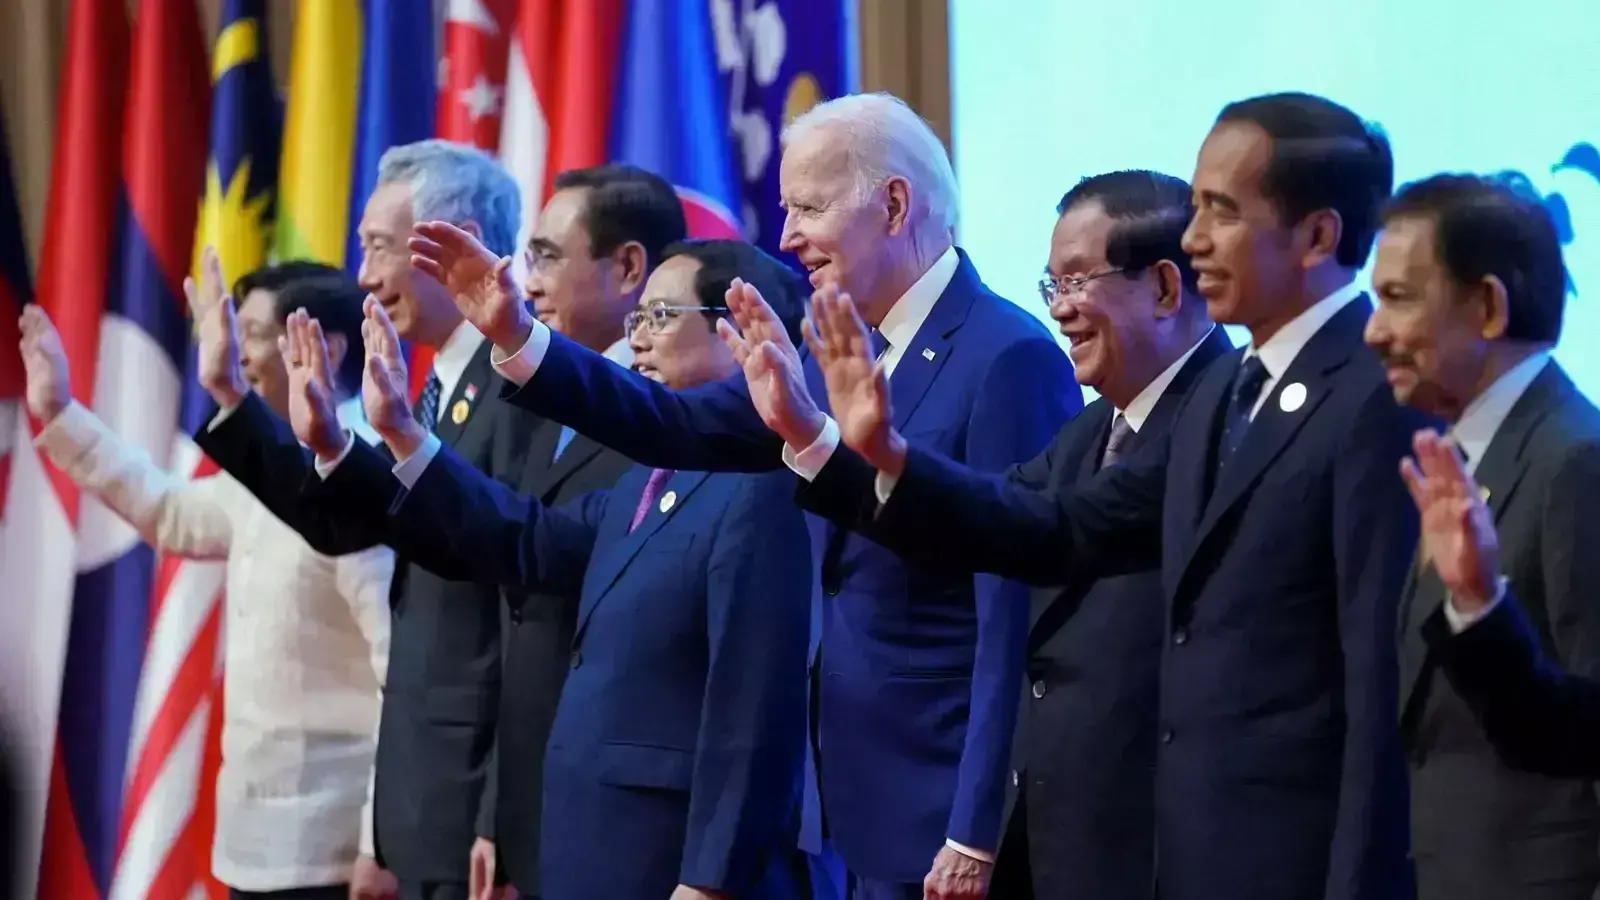 U.S. President Joe Biden poses with other leaders during the 2022 ASEAN summit in Phnom Penh, Cambodia, November 12, 2022.